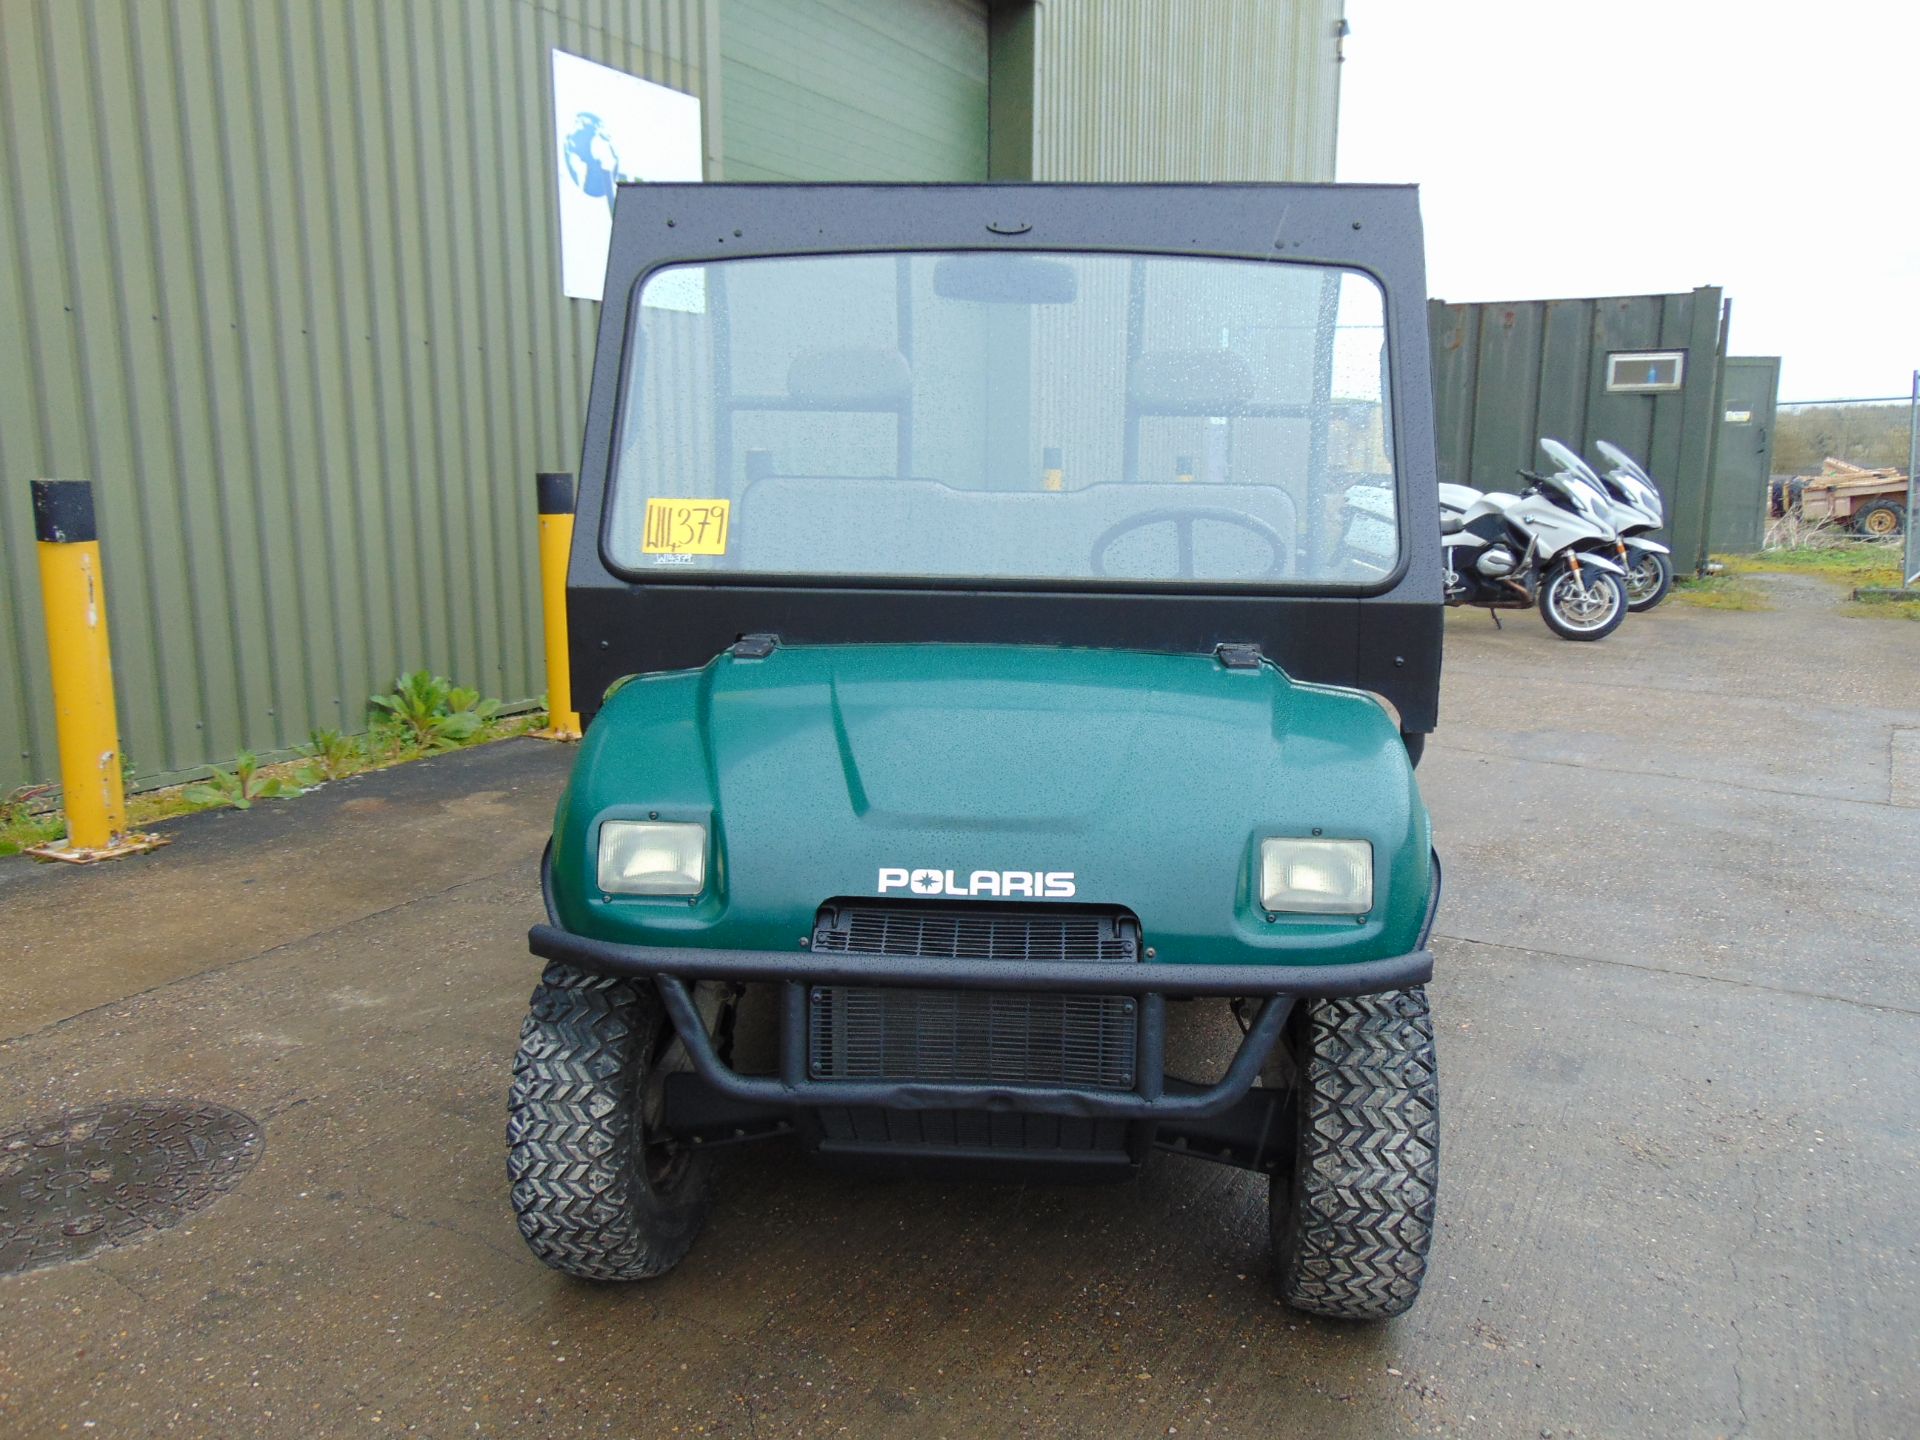 Polaris Ranger 6 x 6 Off-Road Utility Vehicle - Petrol Engine 555 hours Rec from Nat Grid - Image 2 of 30